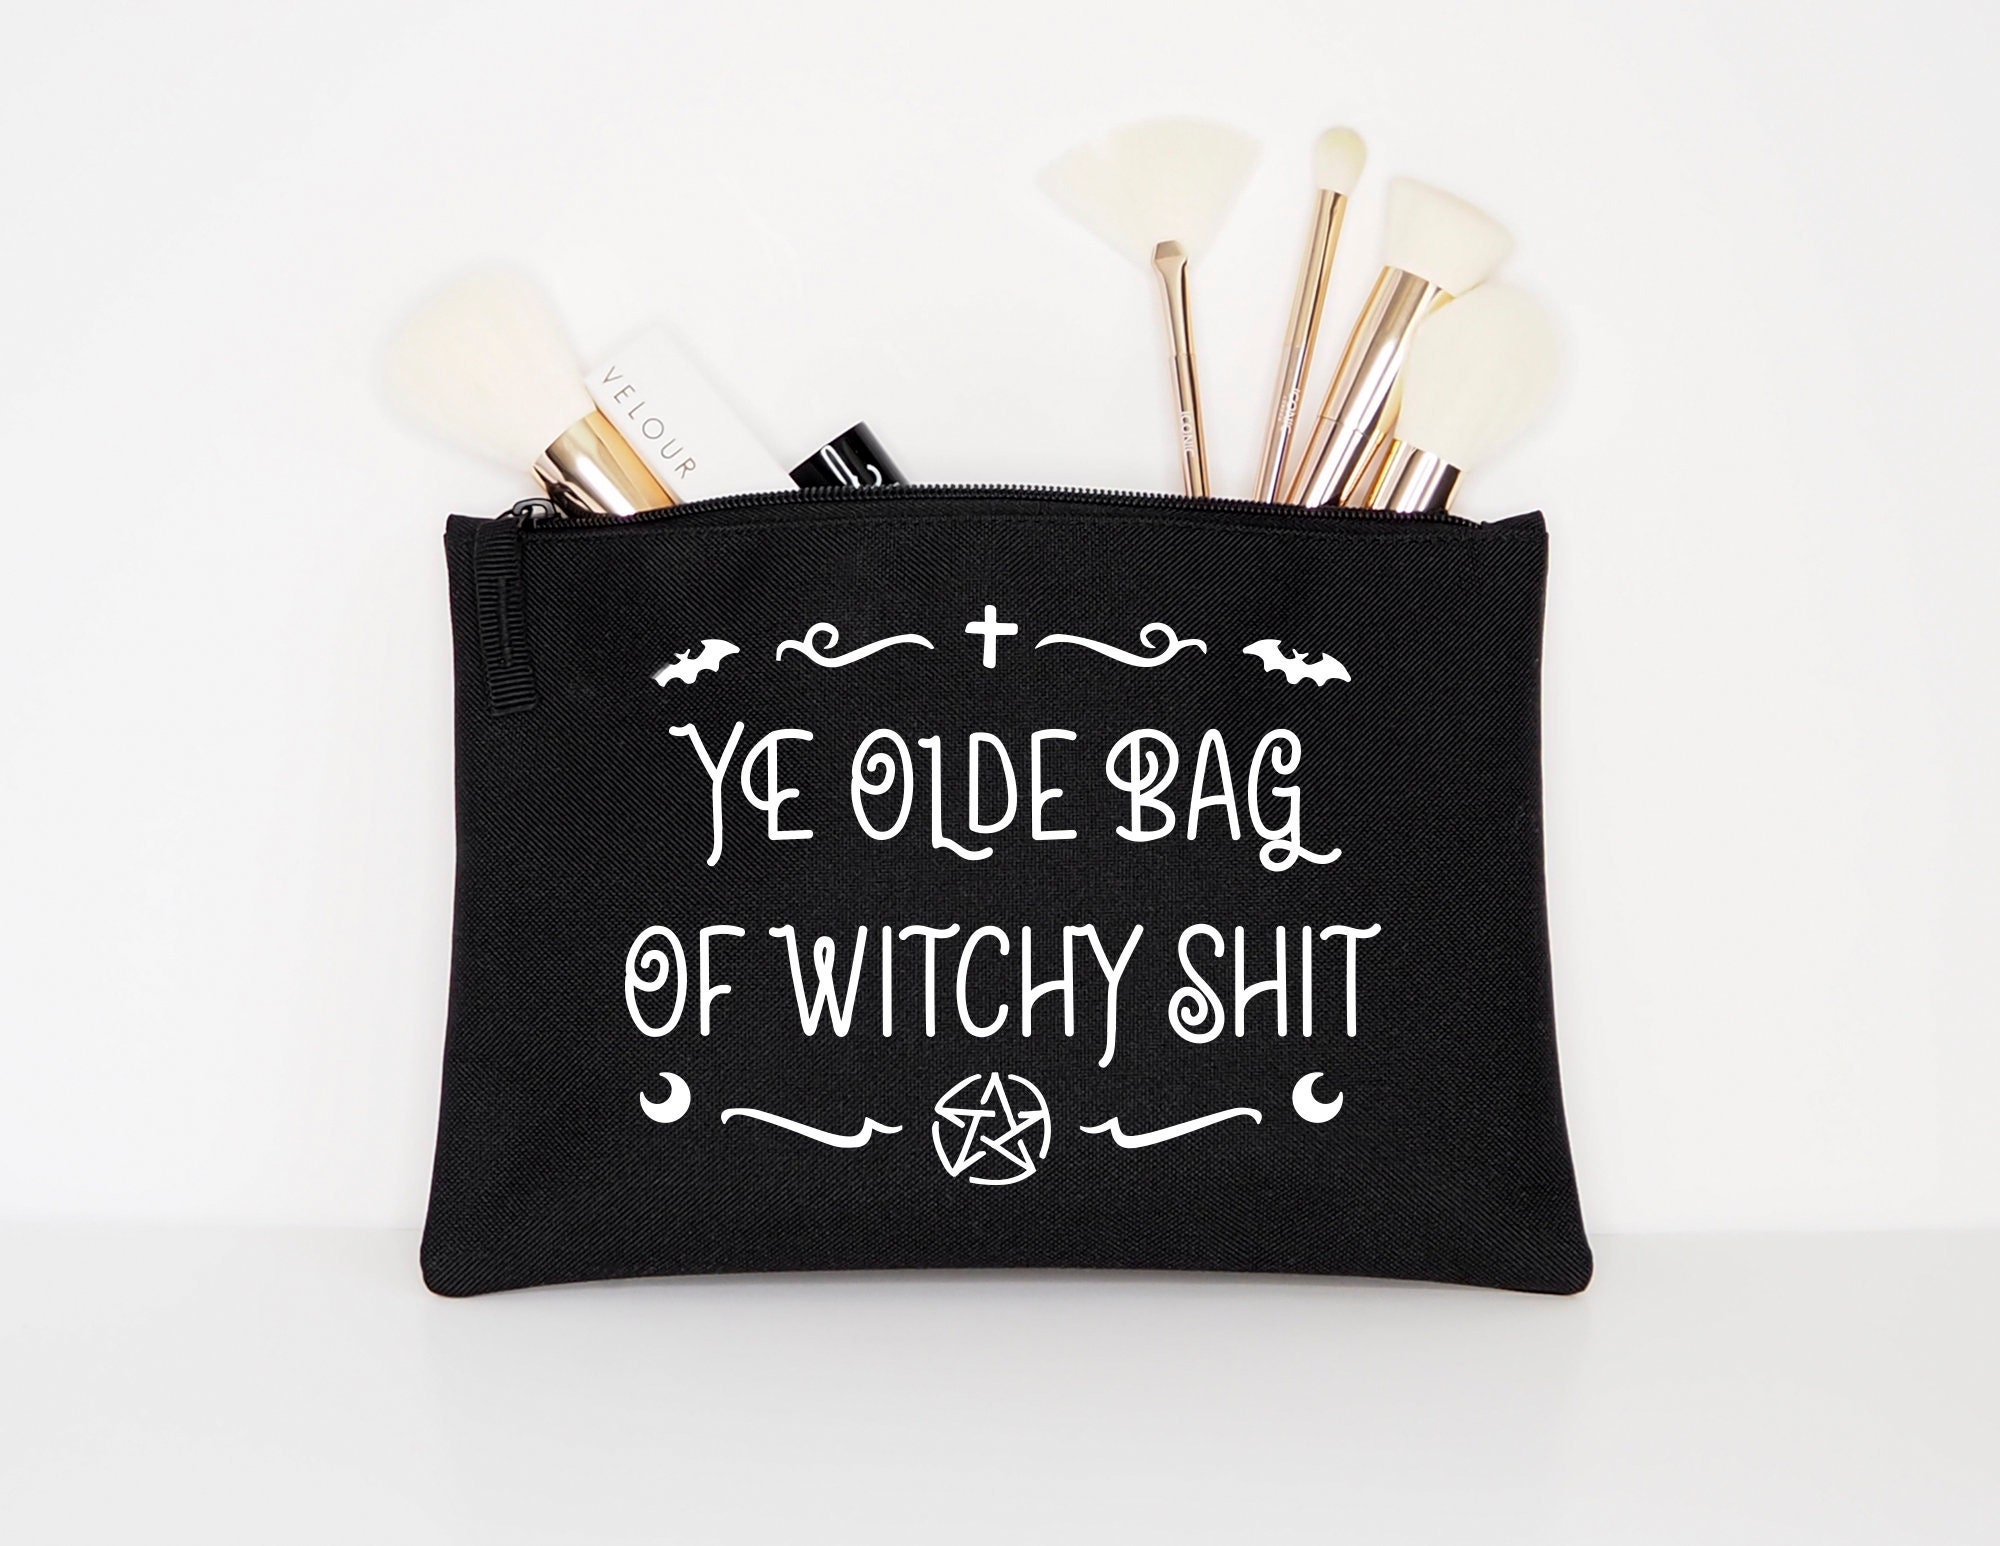 Ye Olde Bag of Witchy Stuff Witch Makeup Bag Witchcraft | Etsy